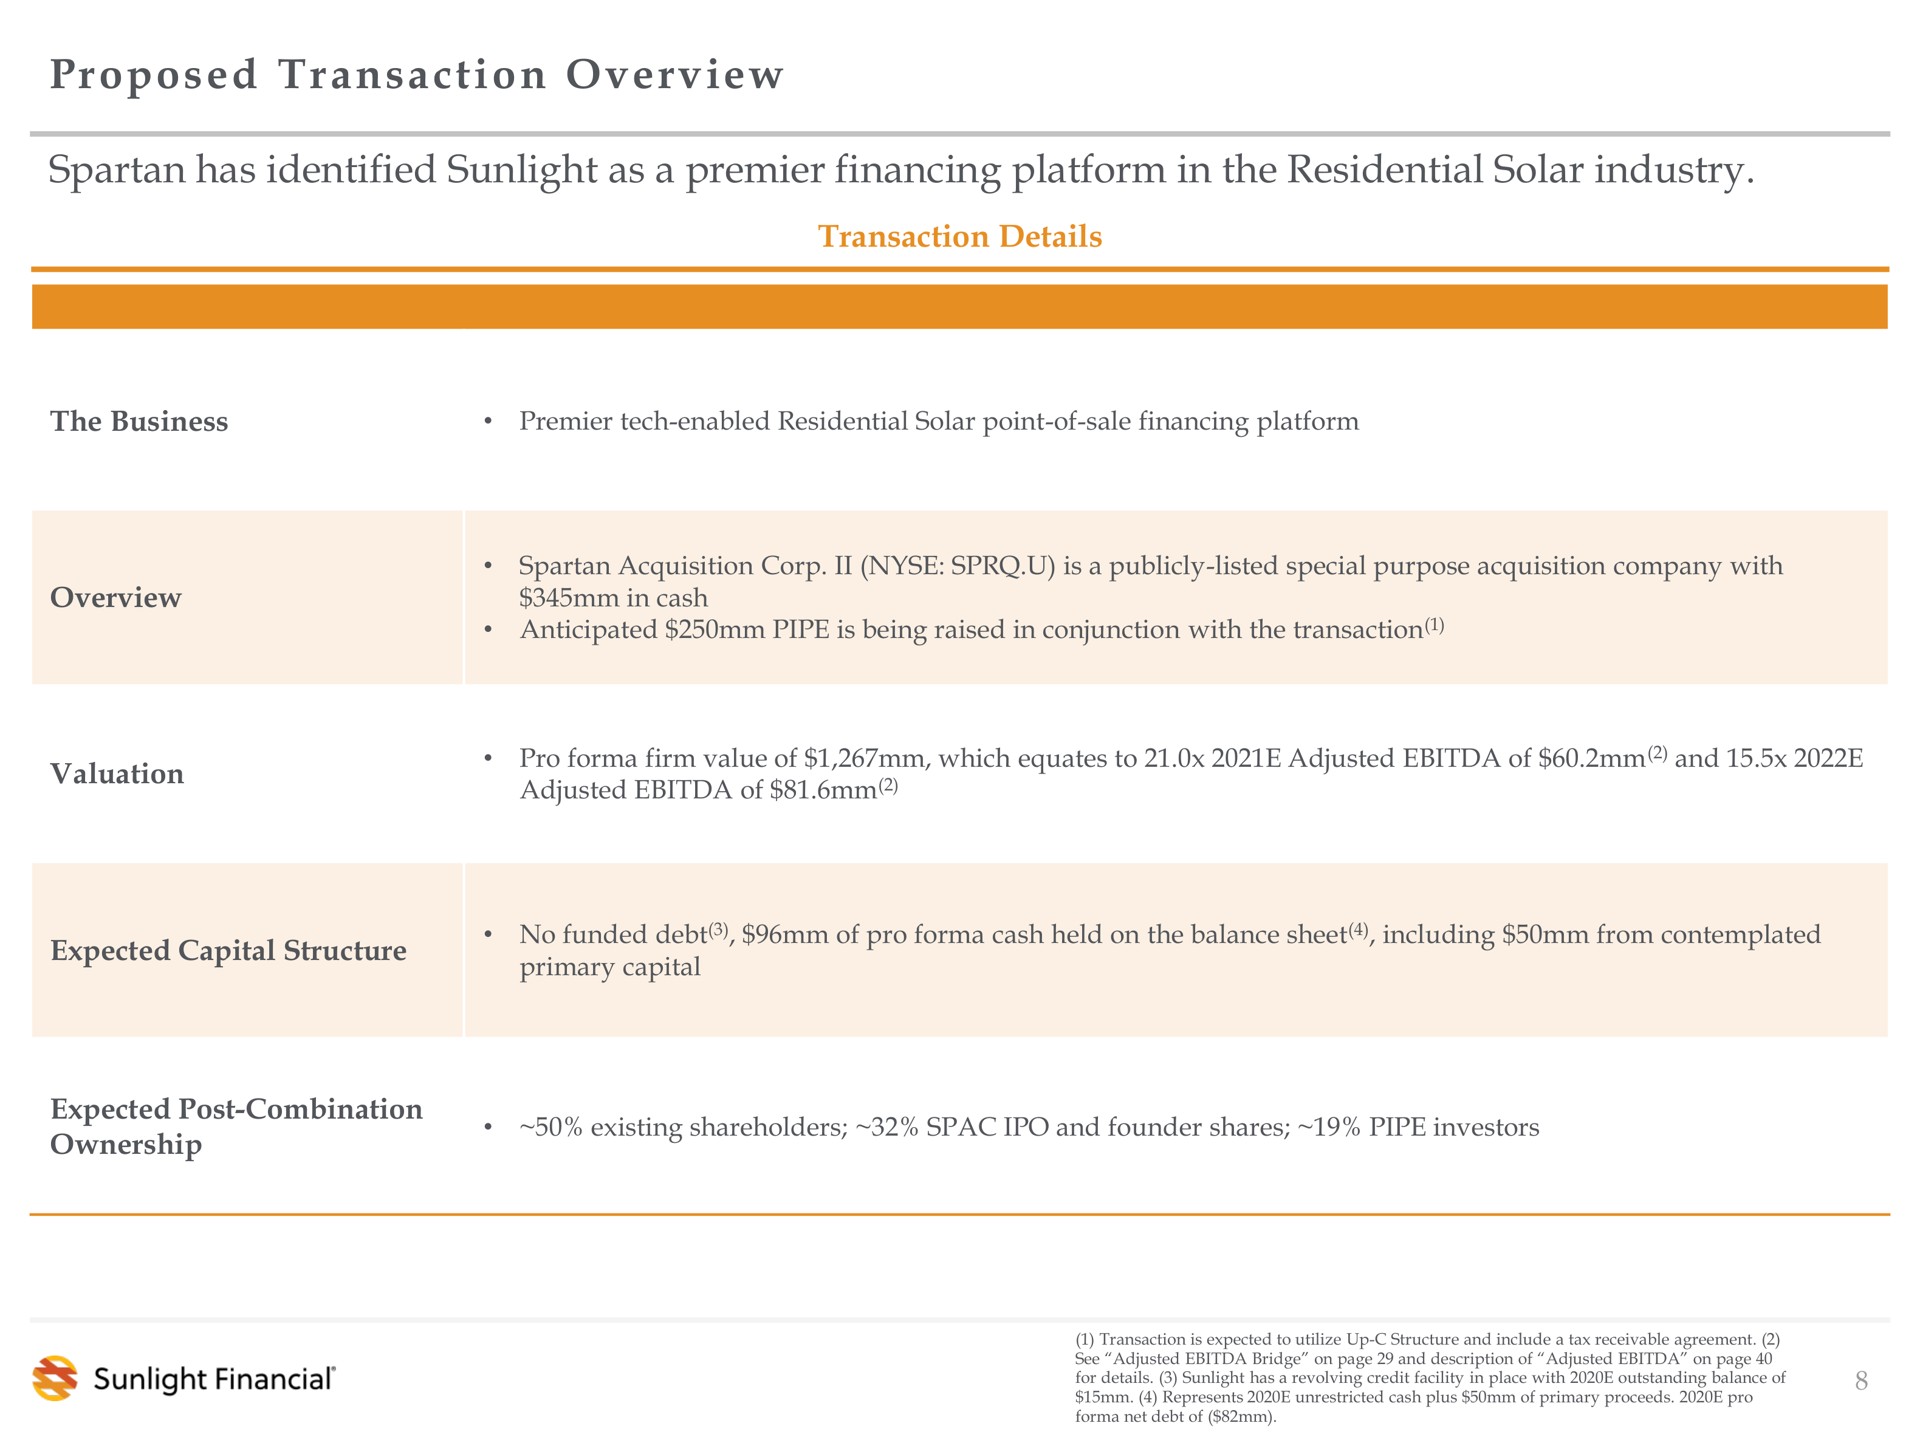 proposed transaction overview has identified sunlight as a premier financing platform in the residential solar industry | Sunlight Financial